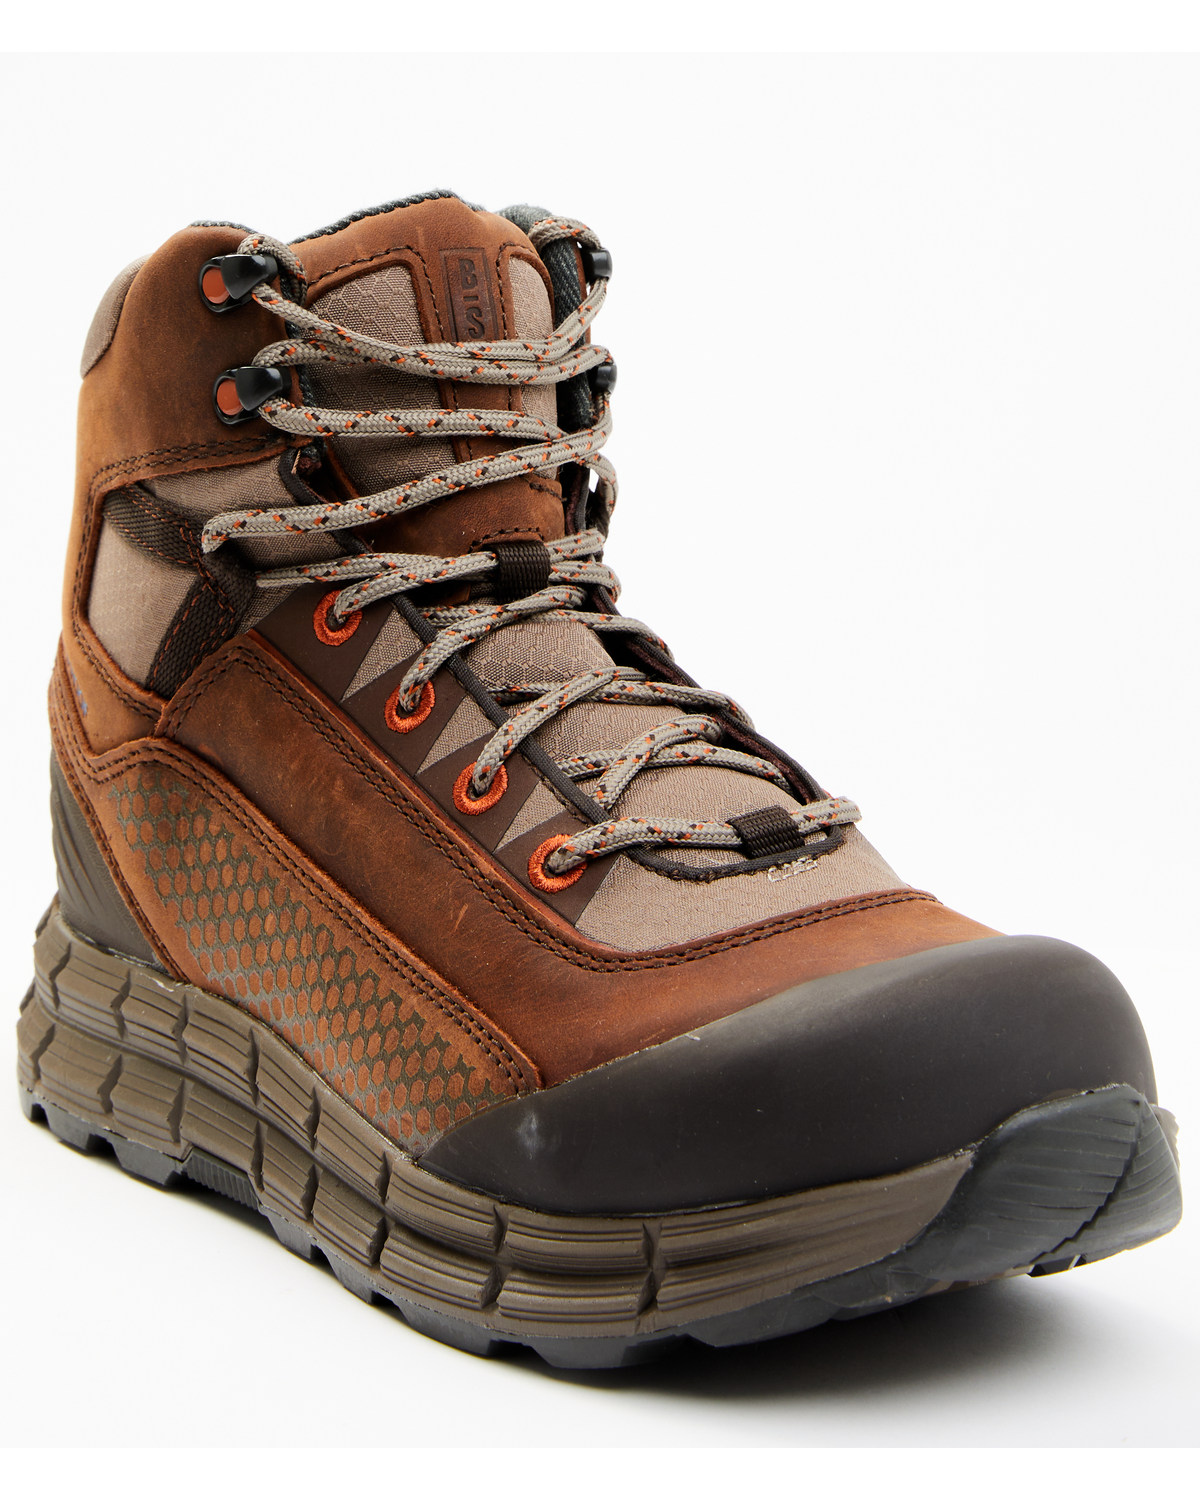 Brothers and Sons Men's 5" Lace-Up Waterproof Hiker Boots - Round Toe